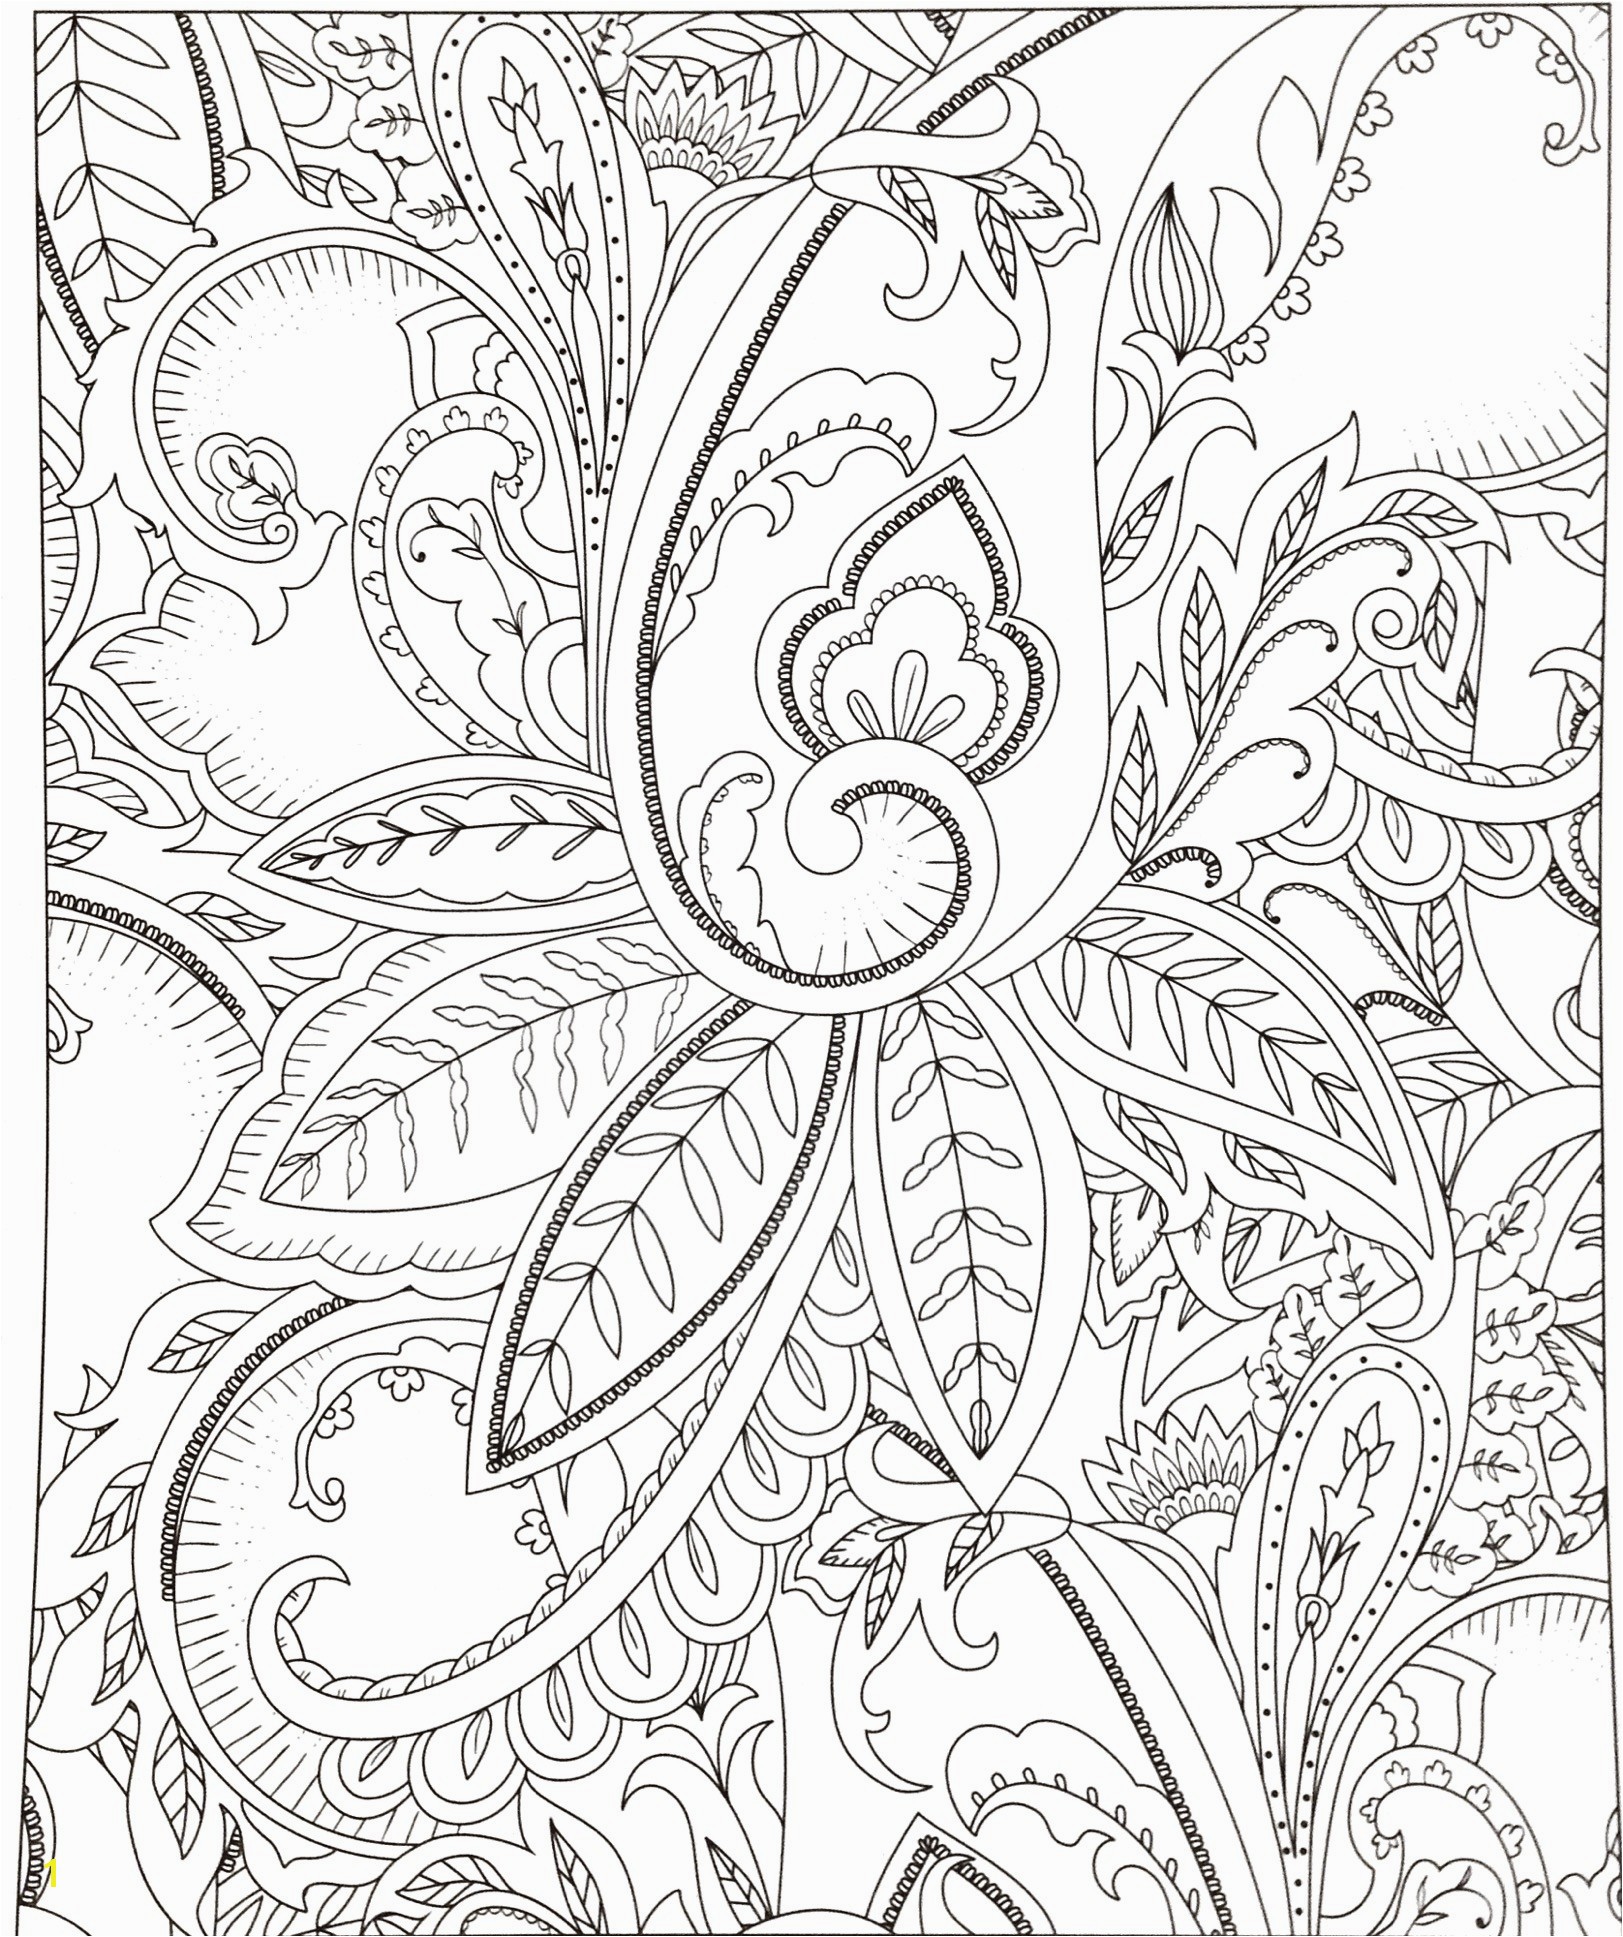 Finished Coloring Pages for Adults What to Do with Finished Coloring Pages Cool Coloring Pages